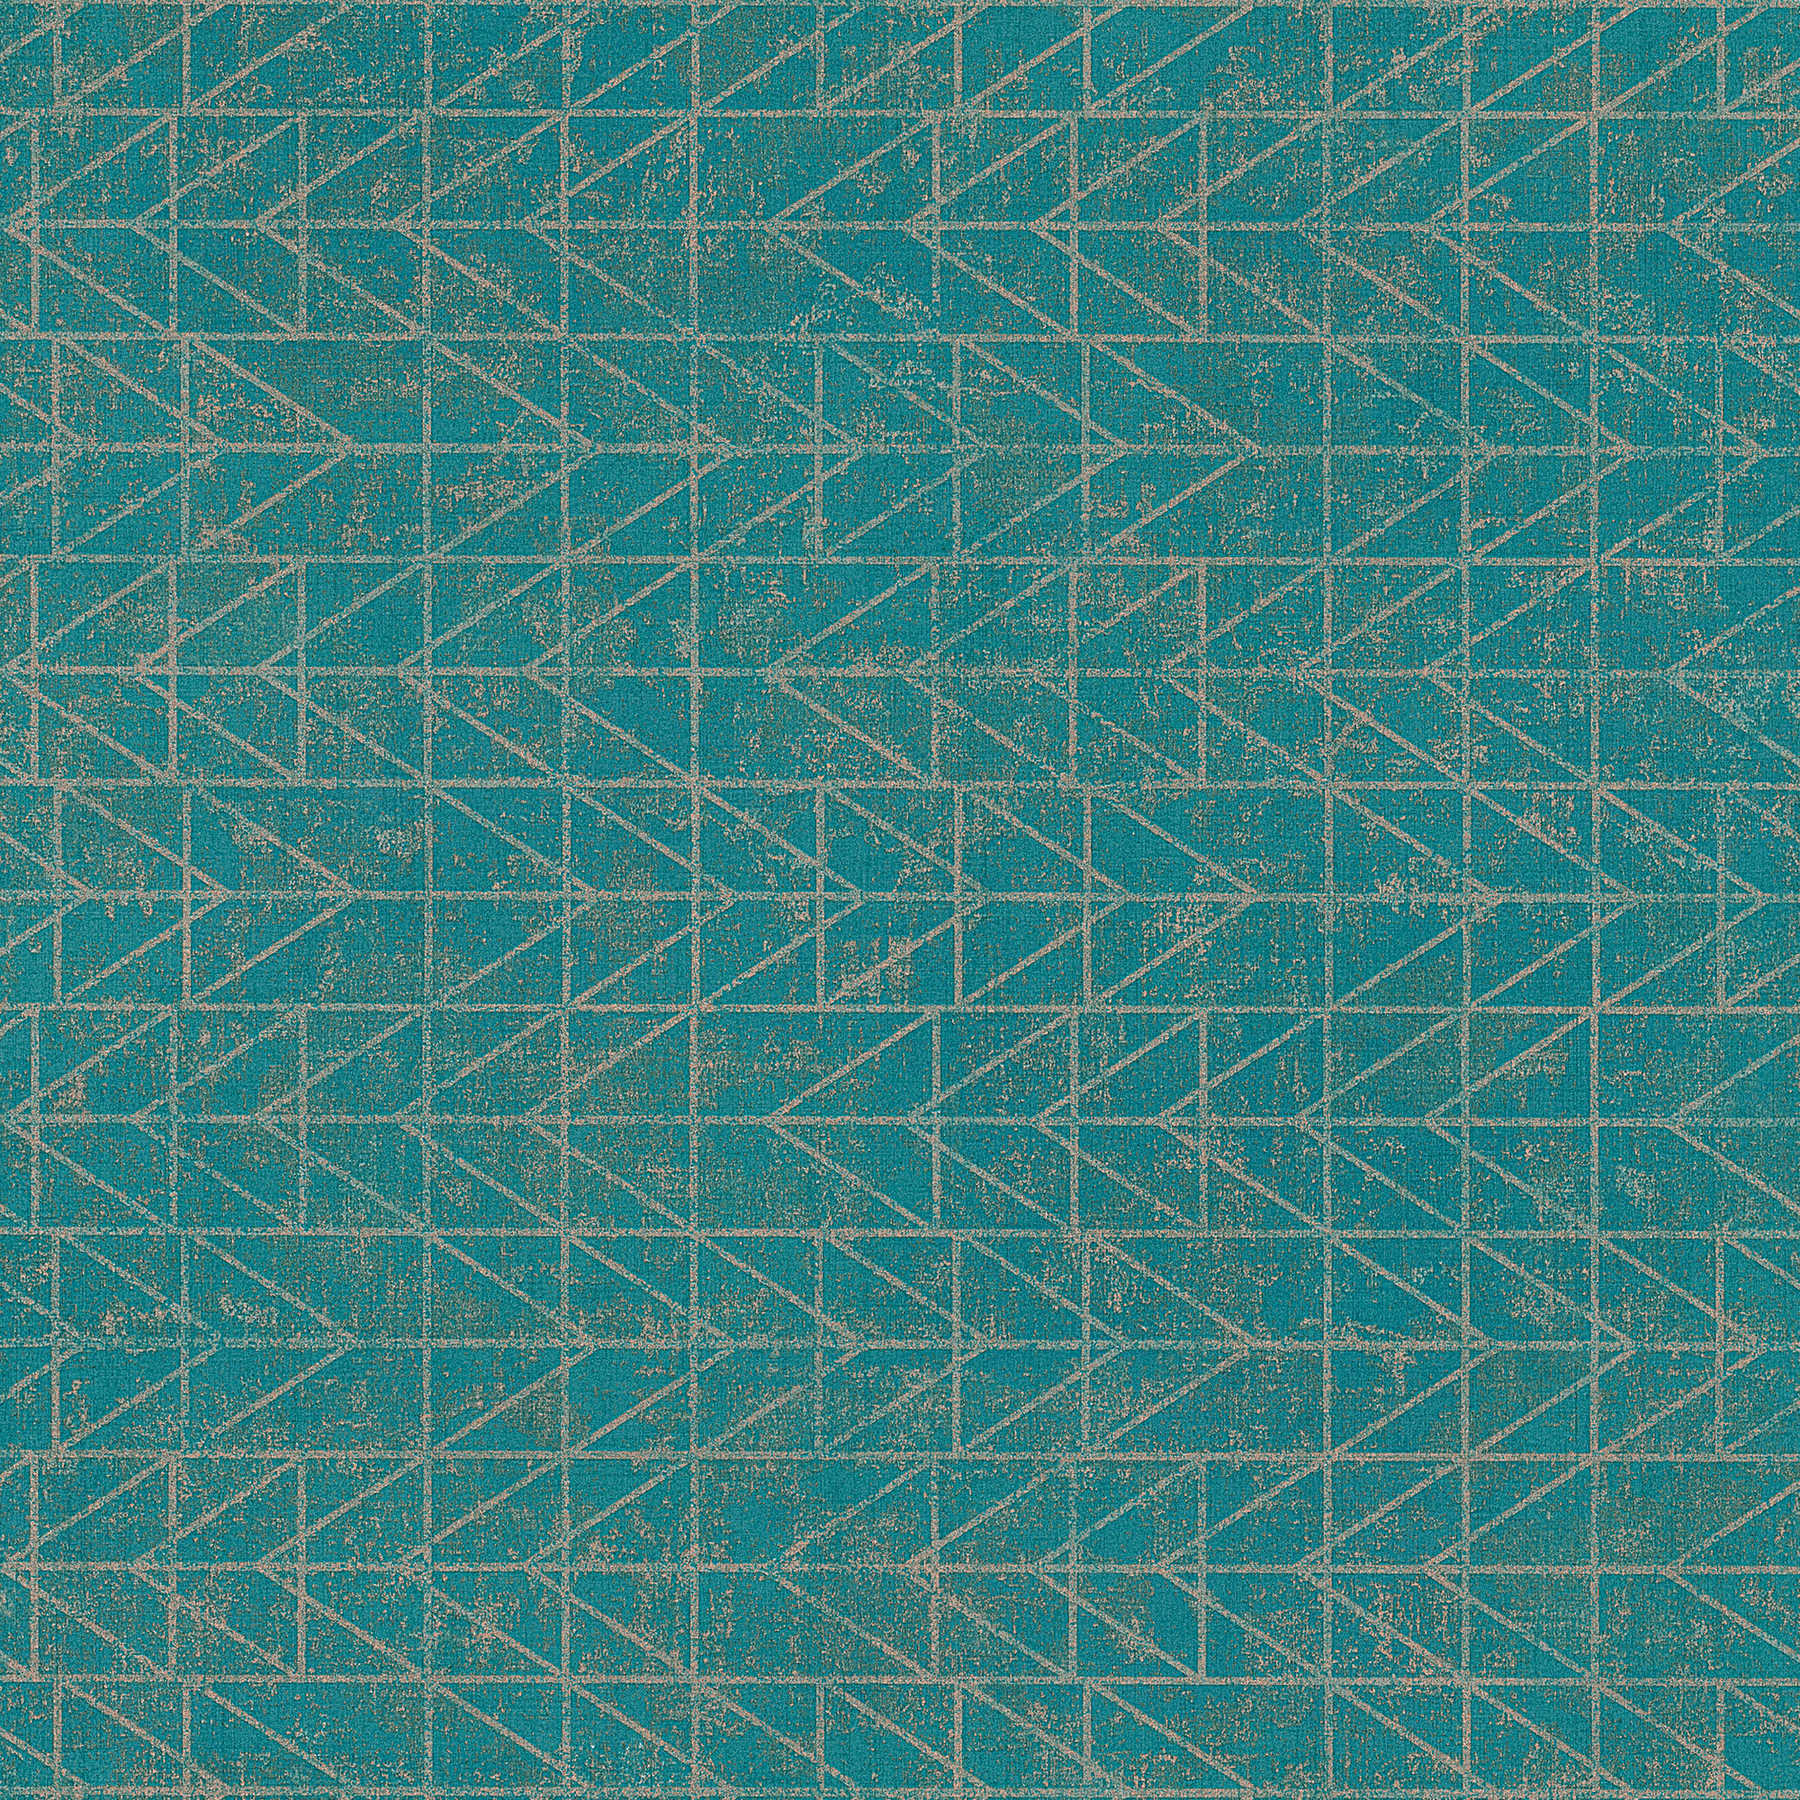 Turquoise ethnic wallpaper with Navajo pattern and metallic effect - blue, green, gold
